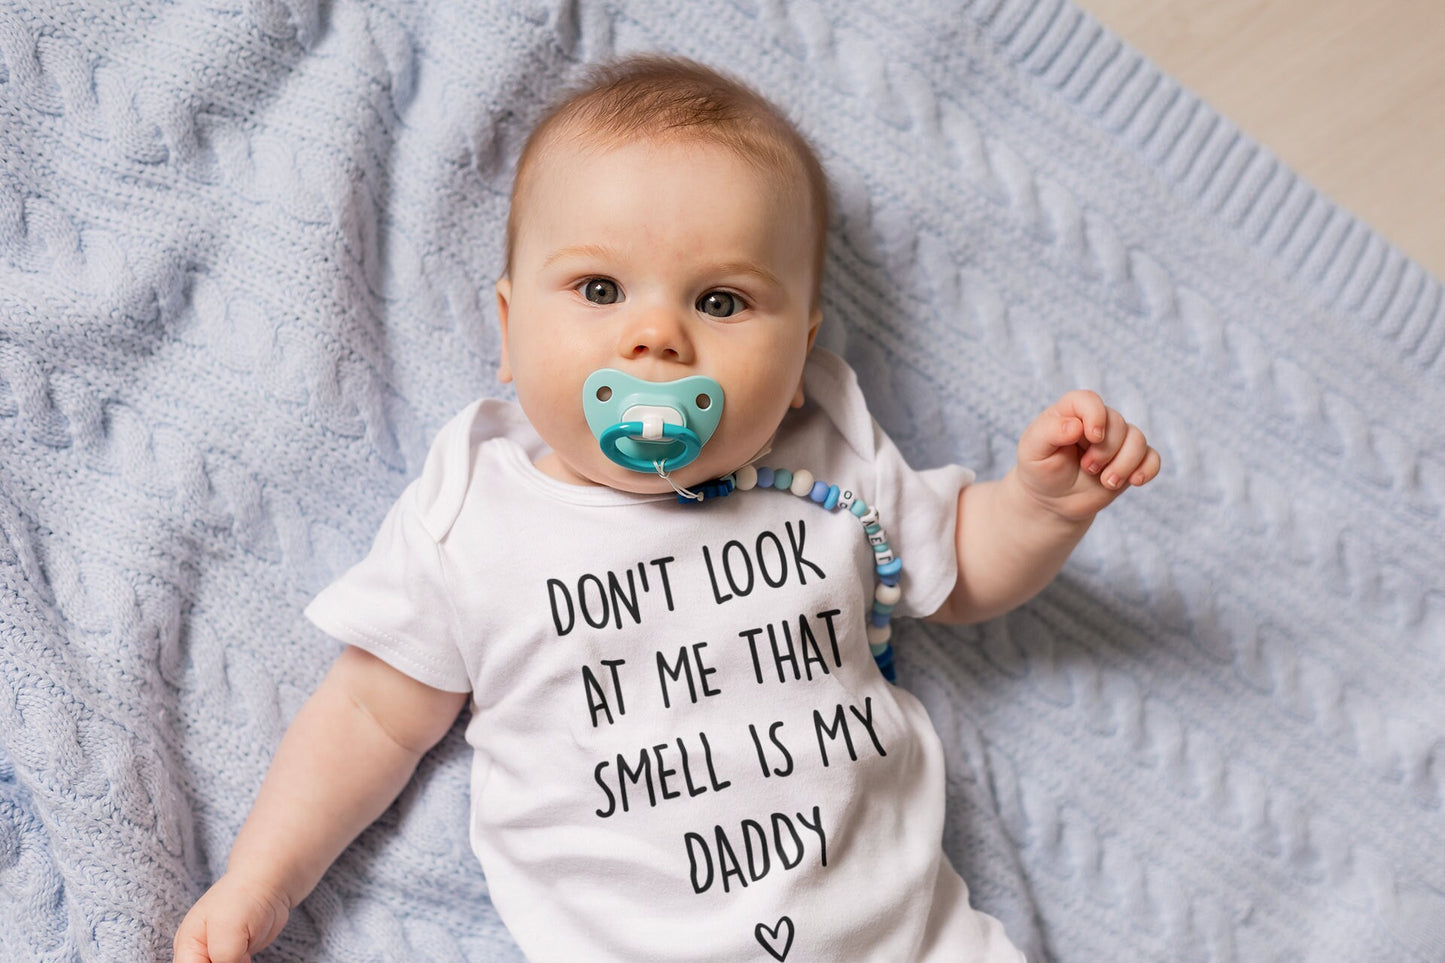 Don't look at me that Smell is my Daddy Baby Vest, Baby Grow